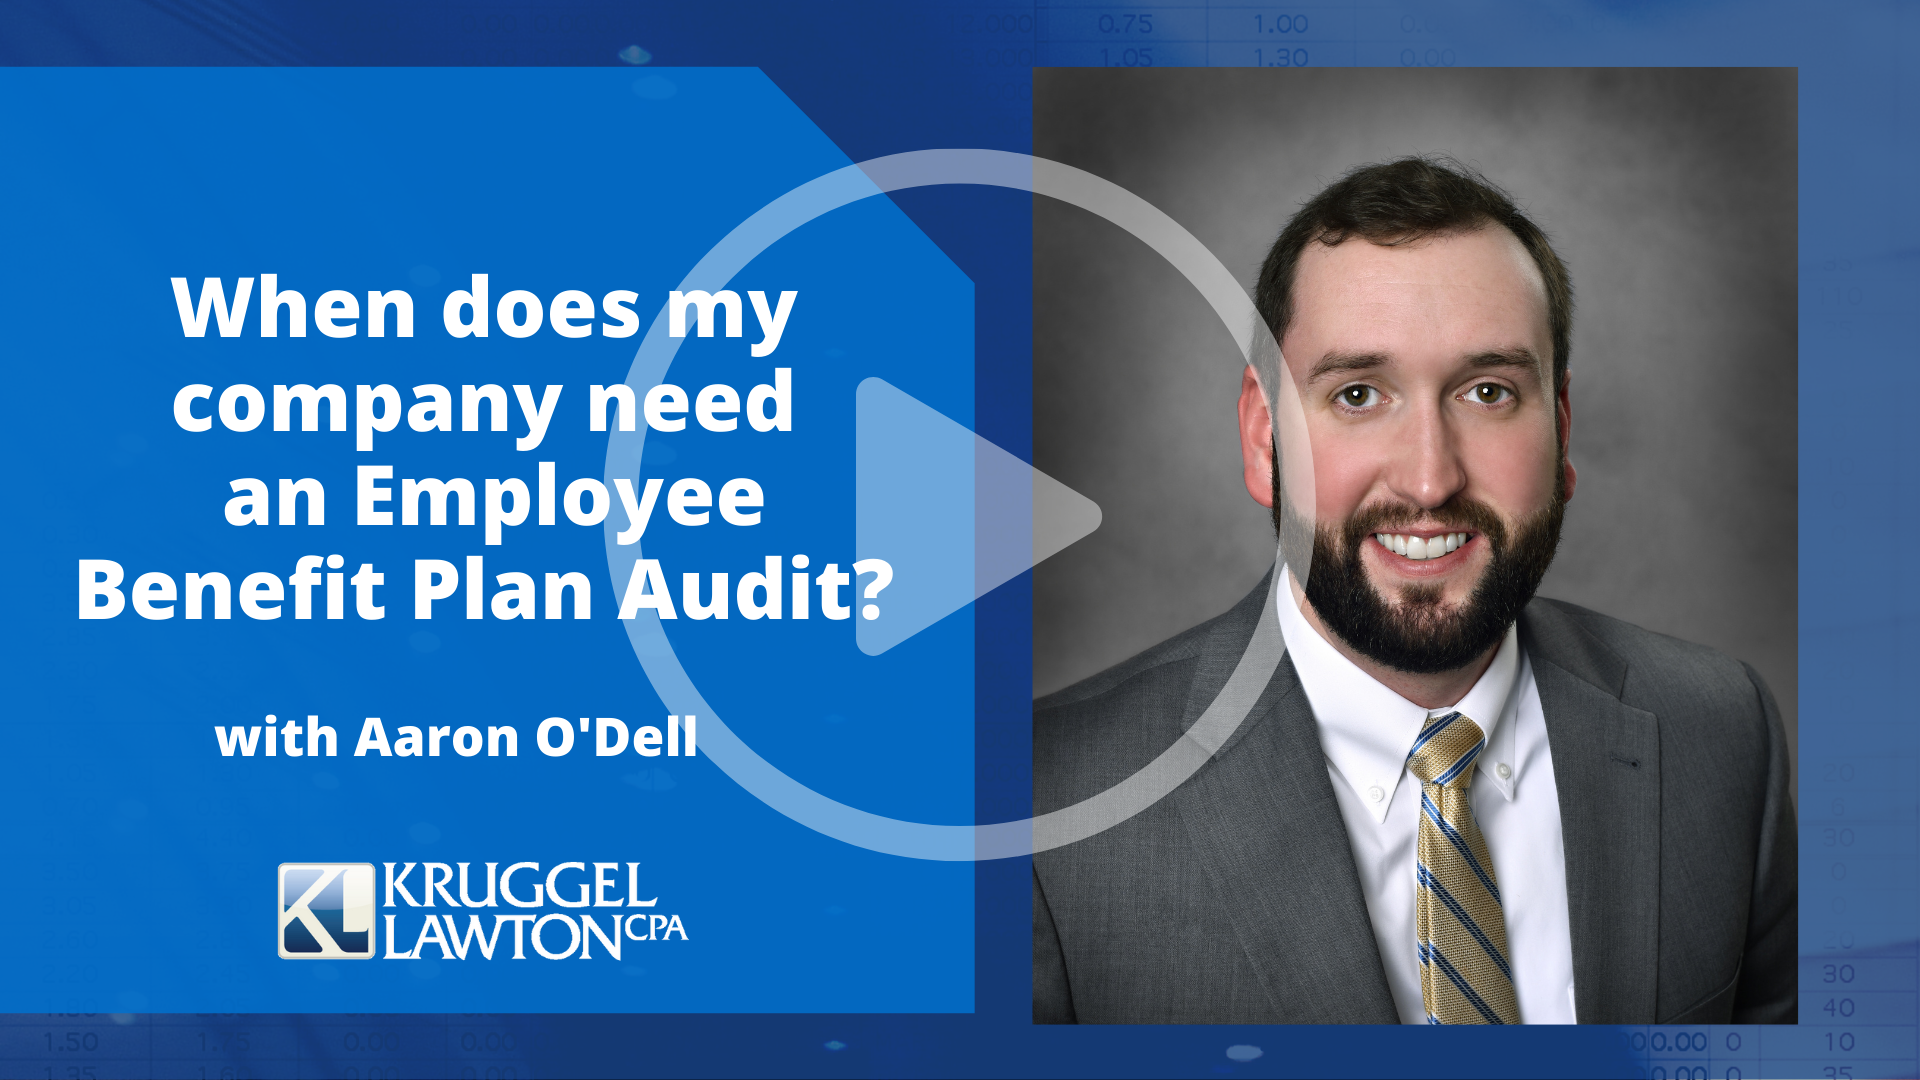 When does my company need an Employee Benefit Plan Audit?